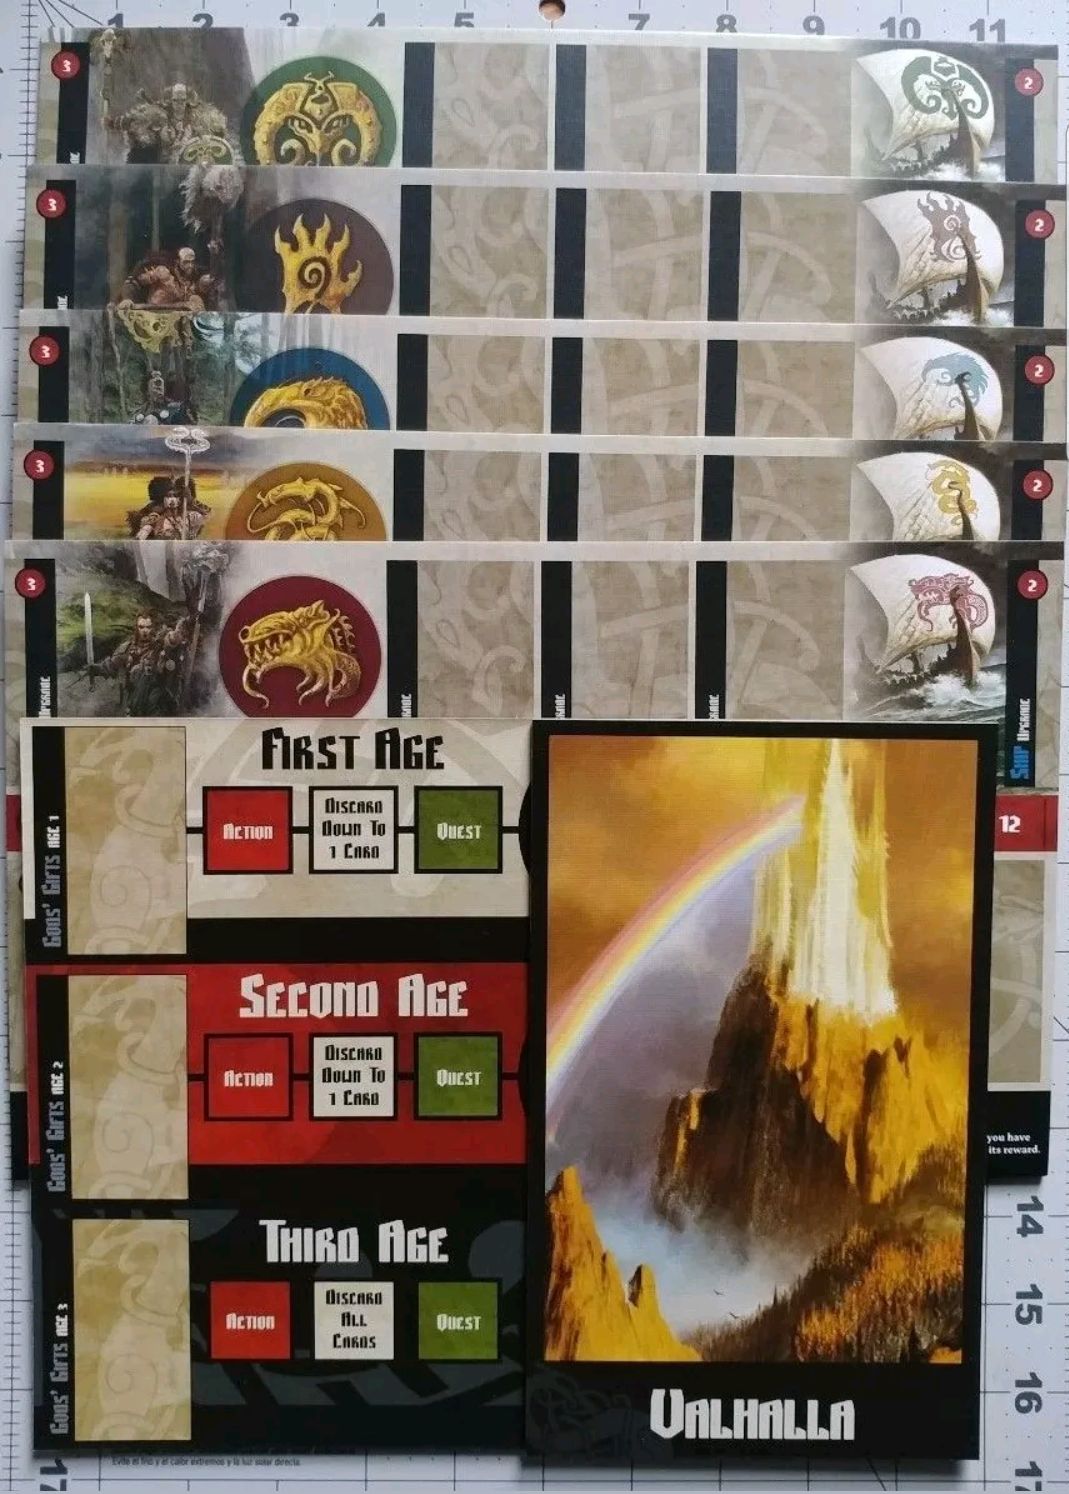 Blood Rage: Promo Thick Card Clan - Valhalla & Age Track Boards  (2-4) board game collectible - Main Image 2